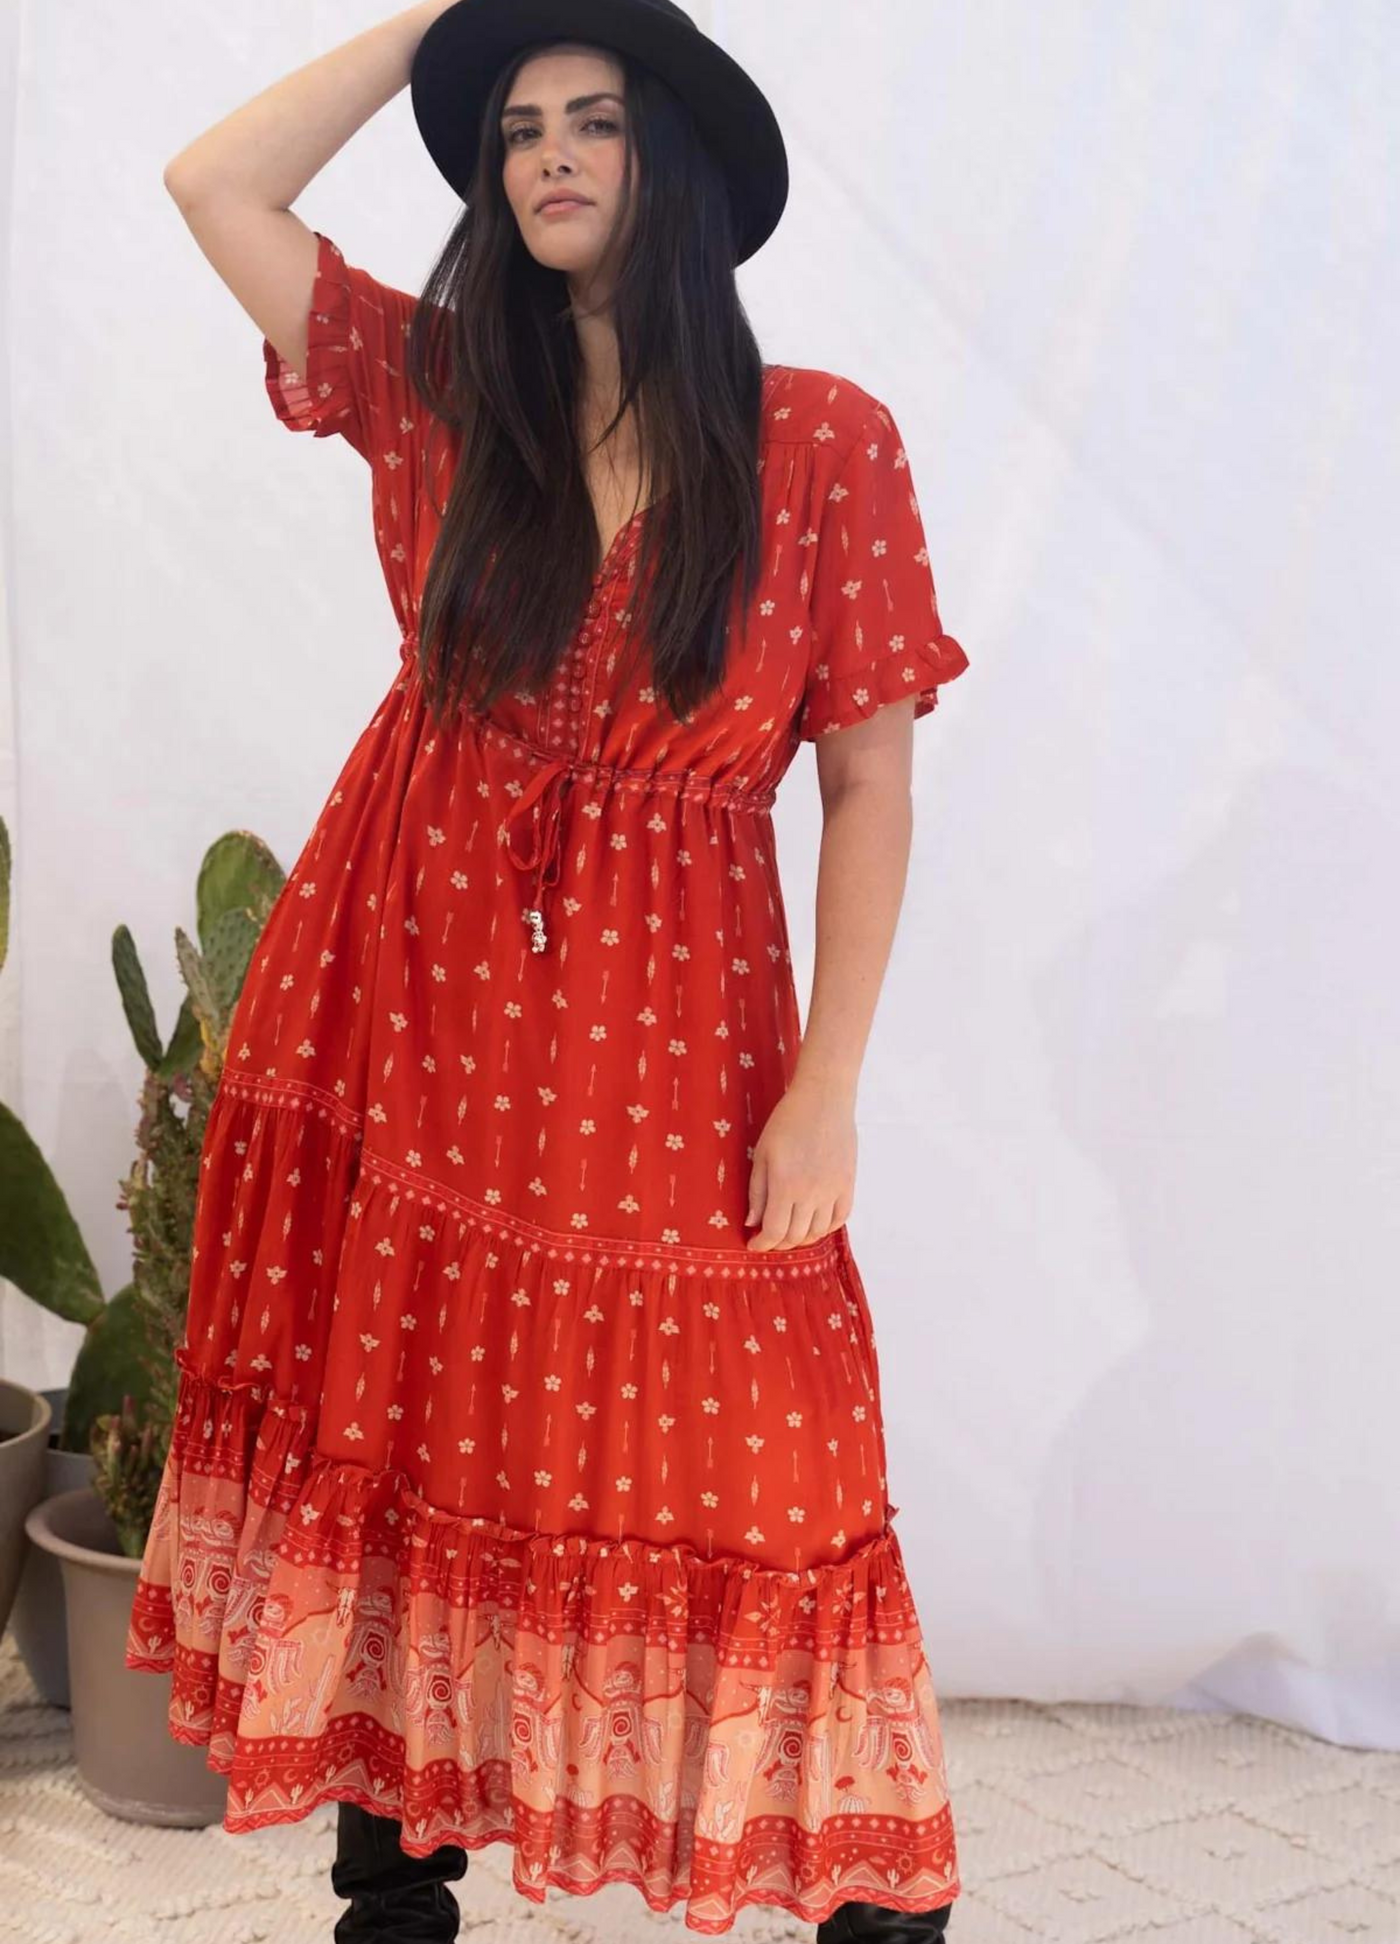 Model wearing a red boho maxi dress with border print at the bottom